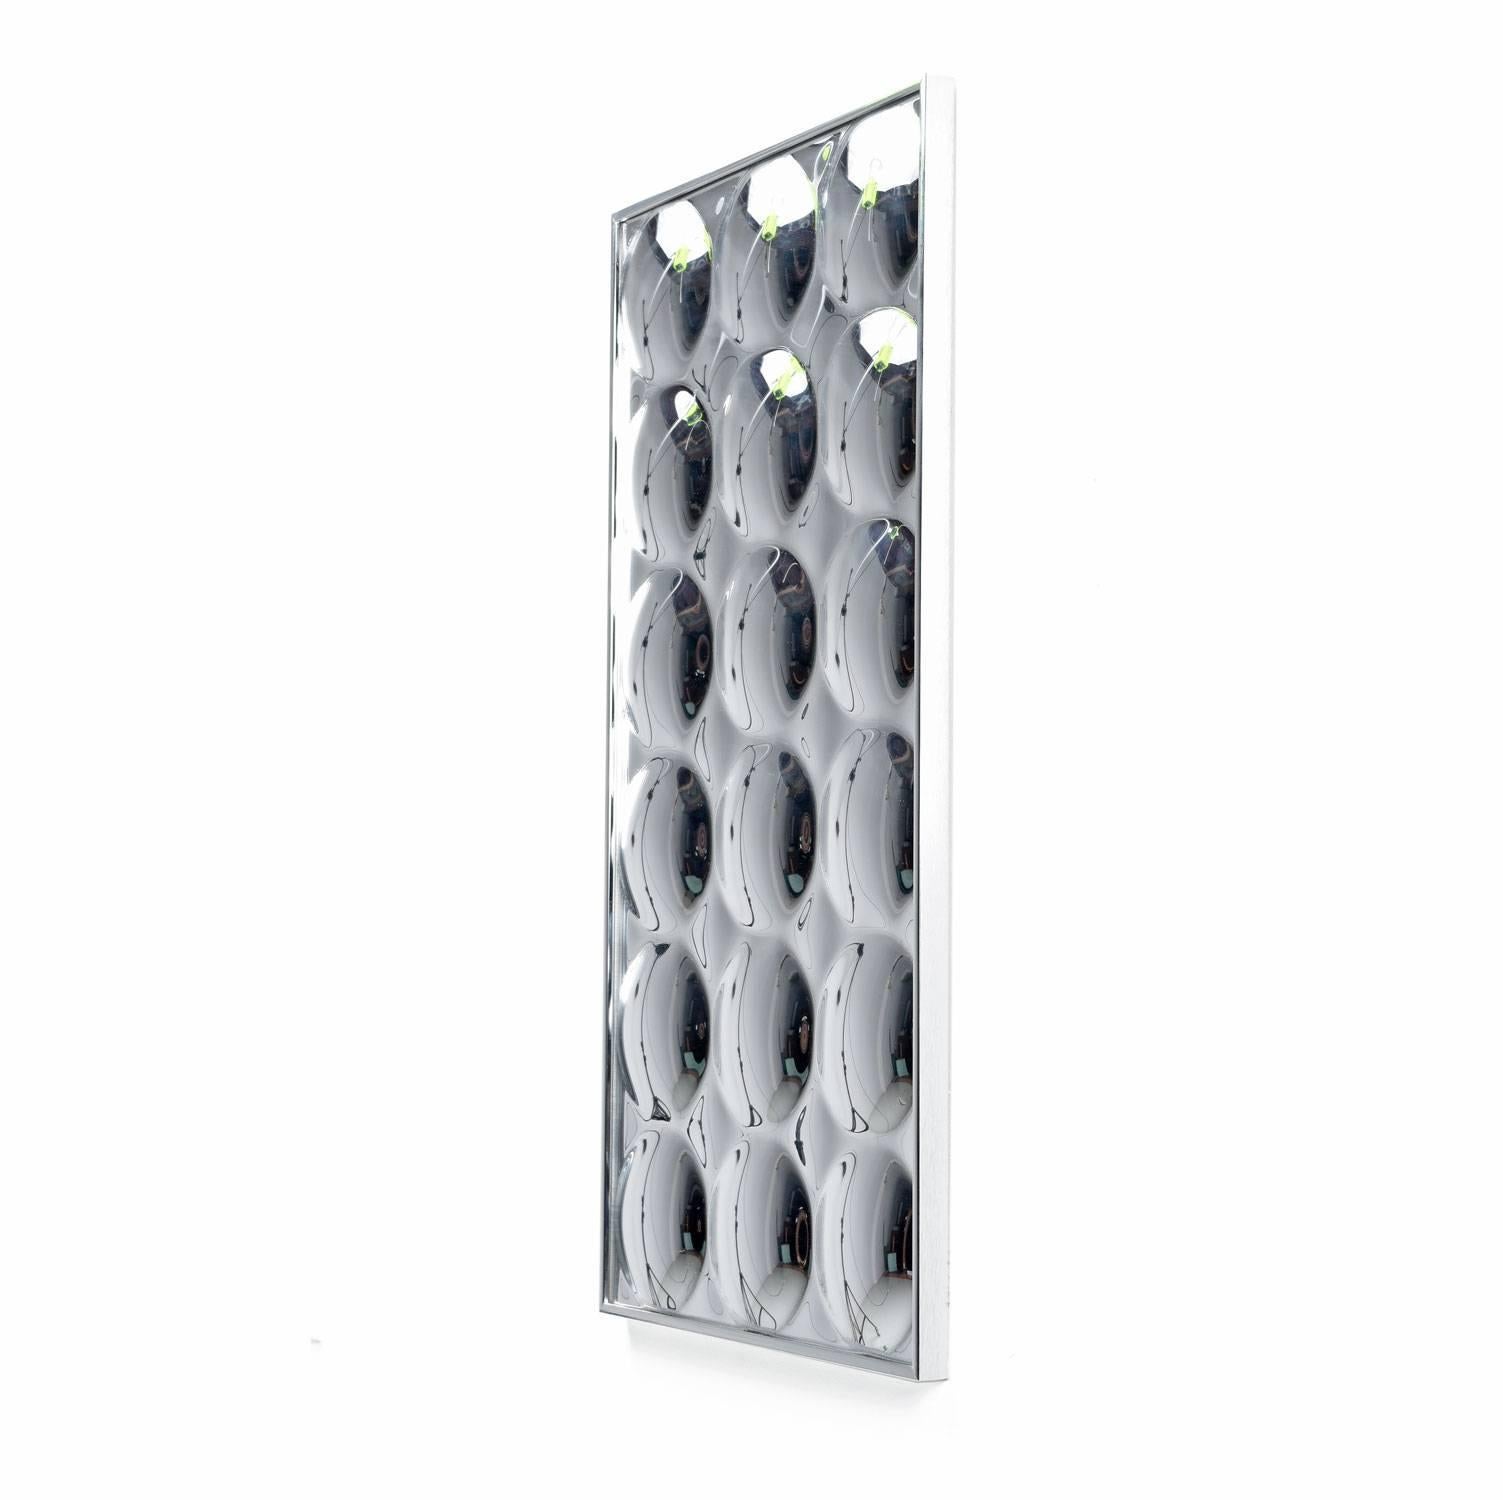 18 silvered acrylic bubbles come together inside a brushed chrome frame to create this optical wall art. Each bubble reflects and refracts everything in its view.